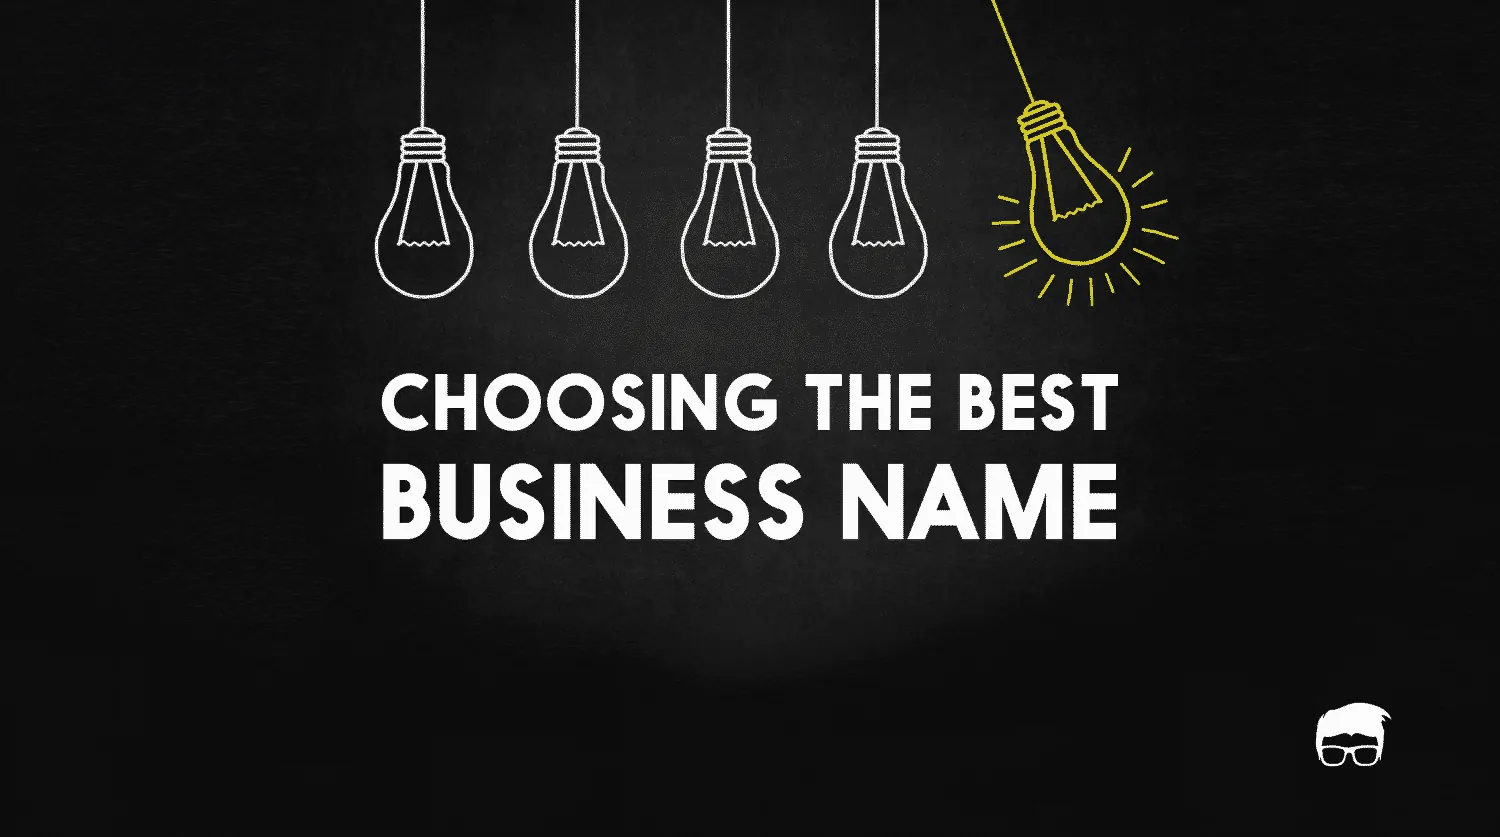 5 Tips To Come Up With A Great Business Name